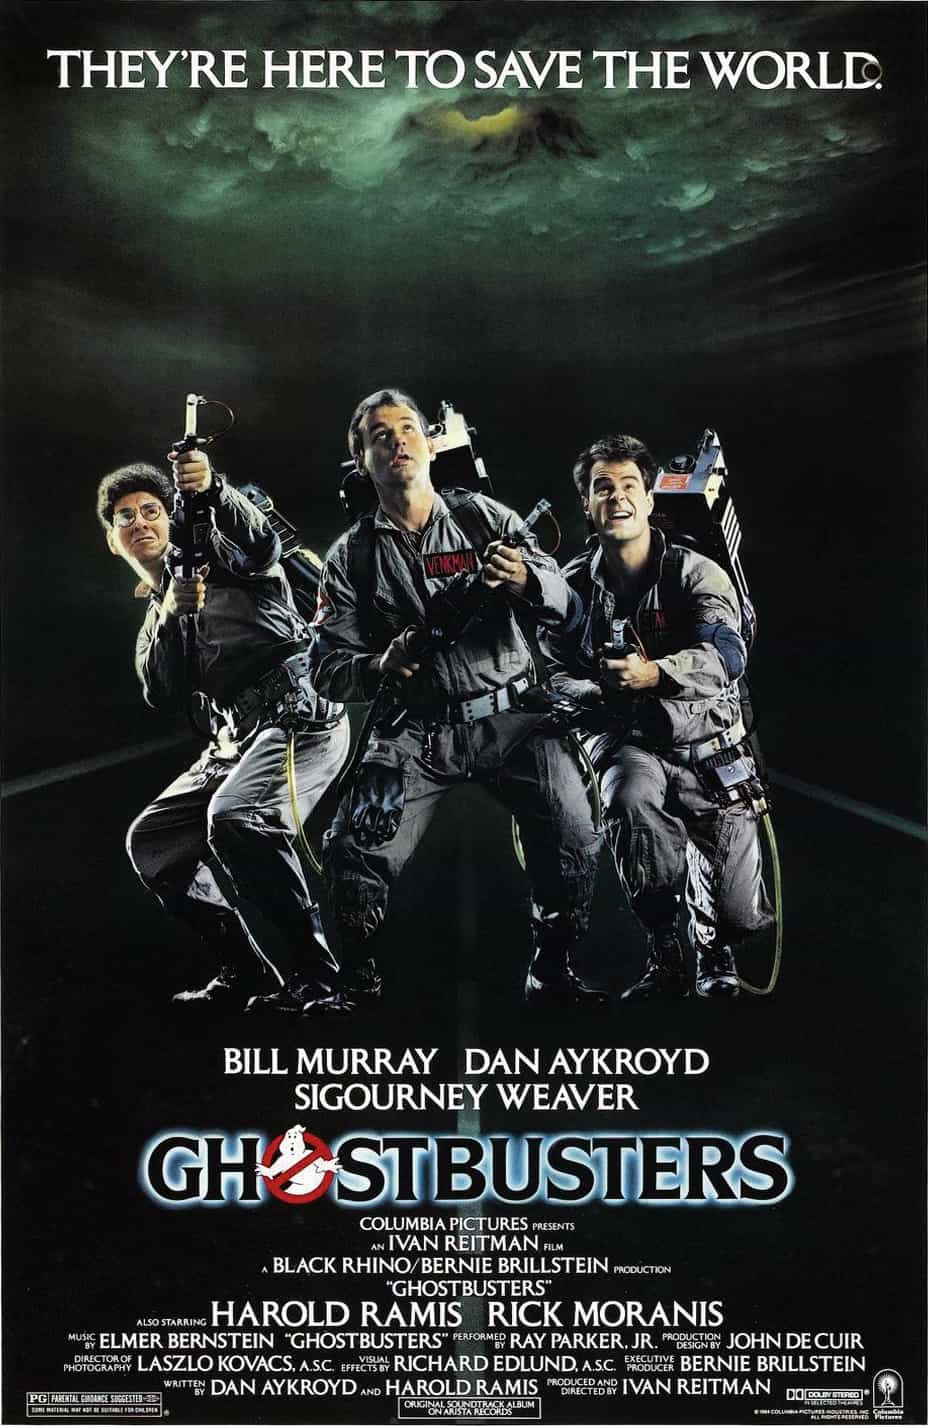 Its been a long time since the last Ghostbusters film, Do we really want them back?
